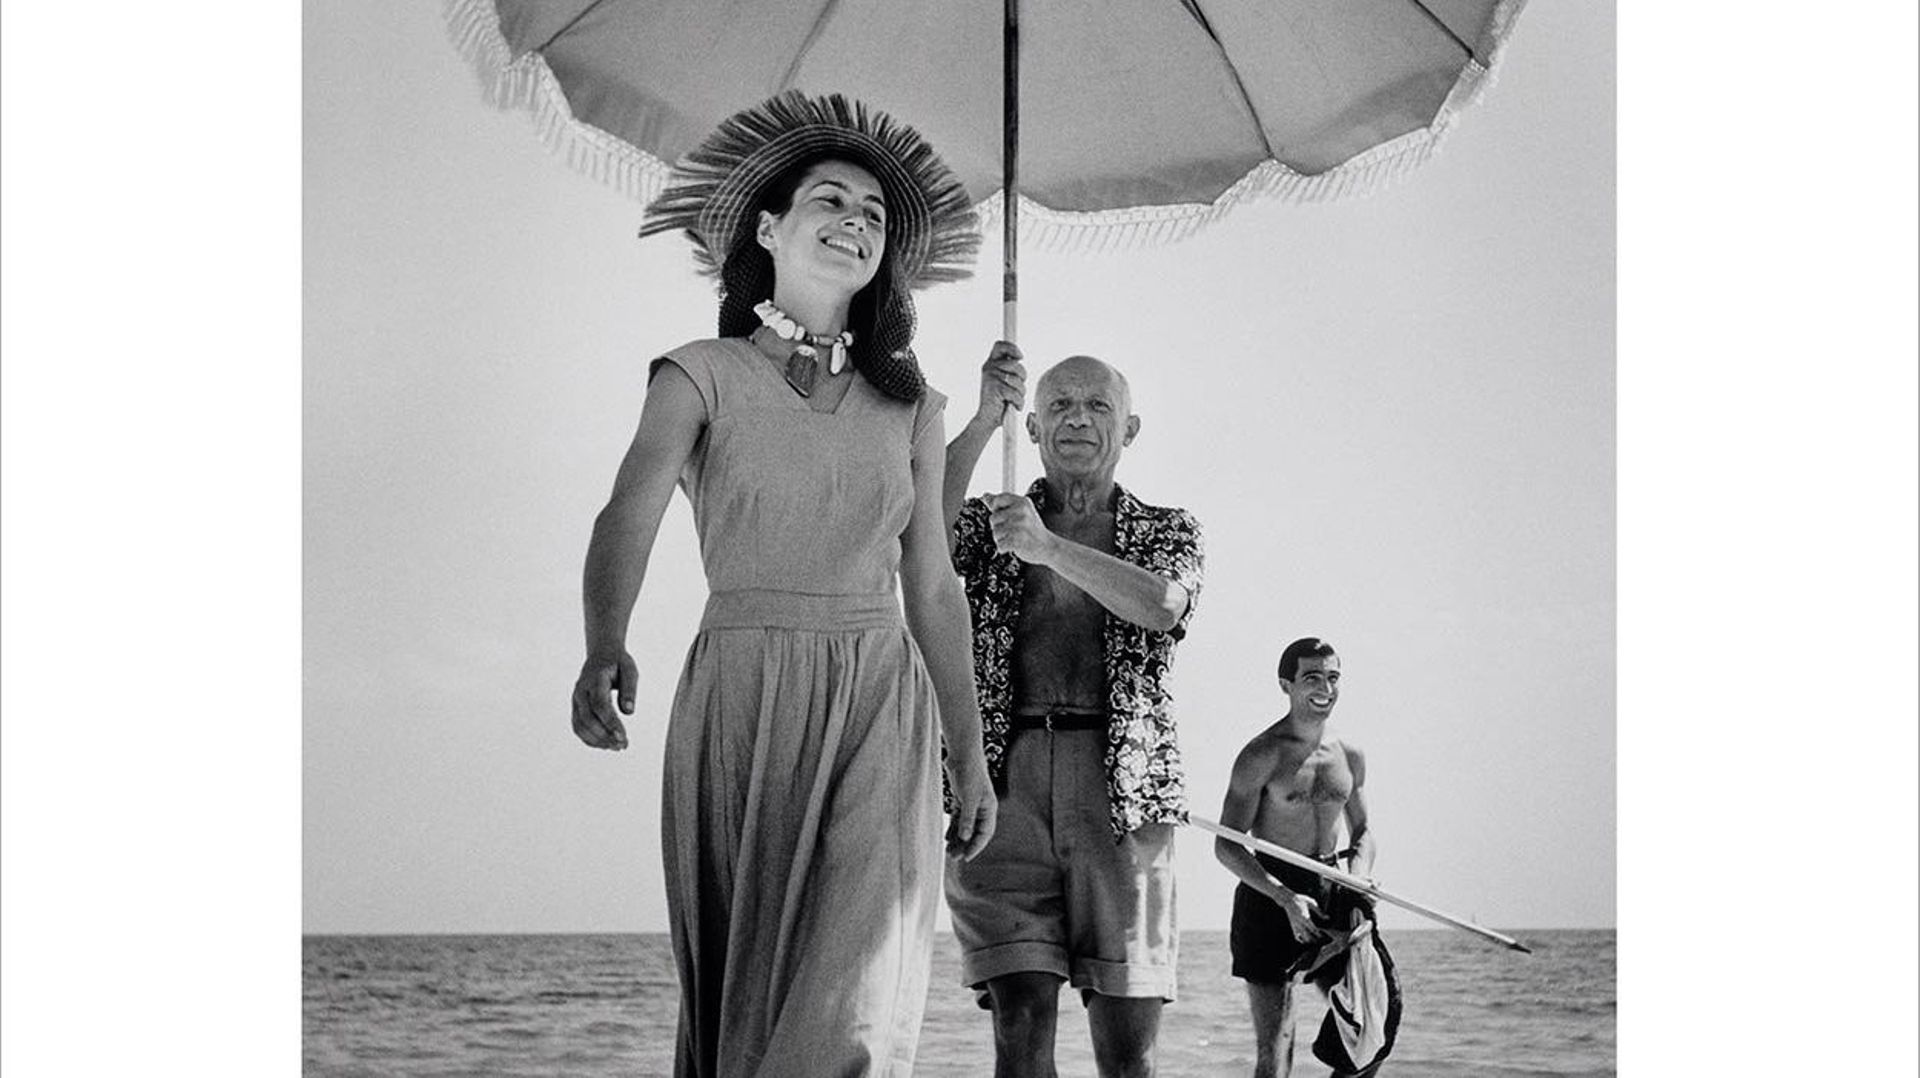 Pablo Picasso with his nephew Javier Vilato and Françoise Gilot on the beach. Golfe-Juan, France. August, 1948.